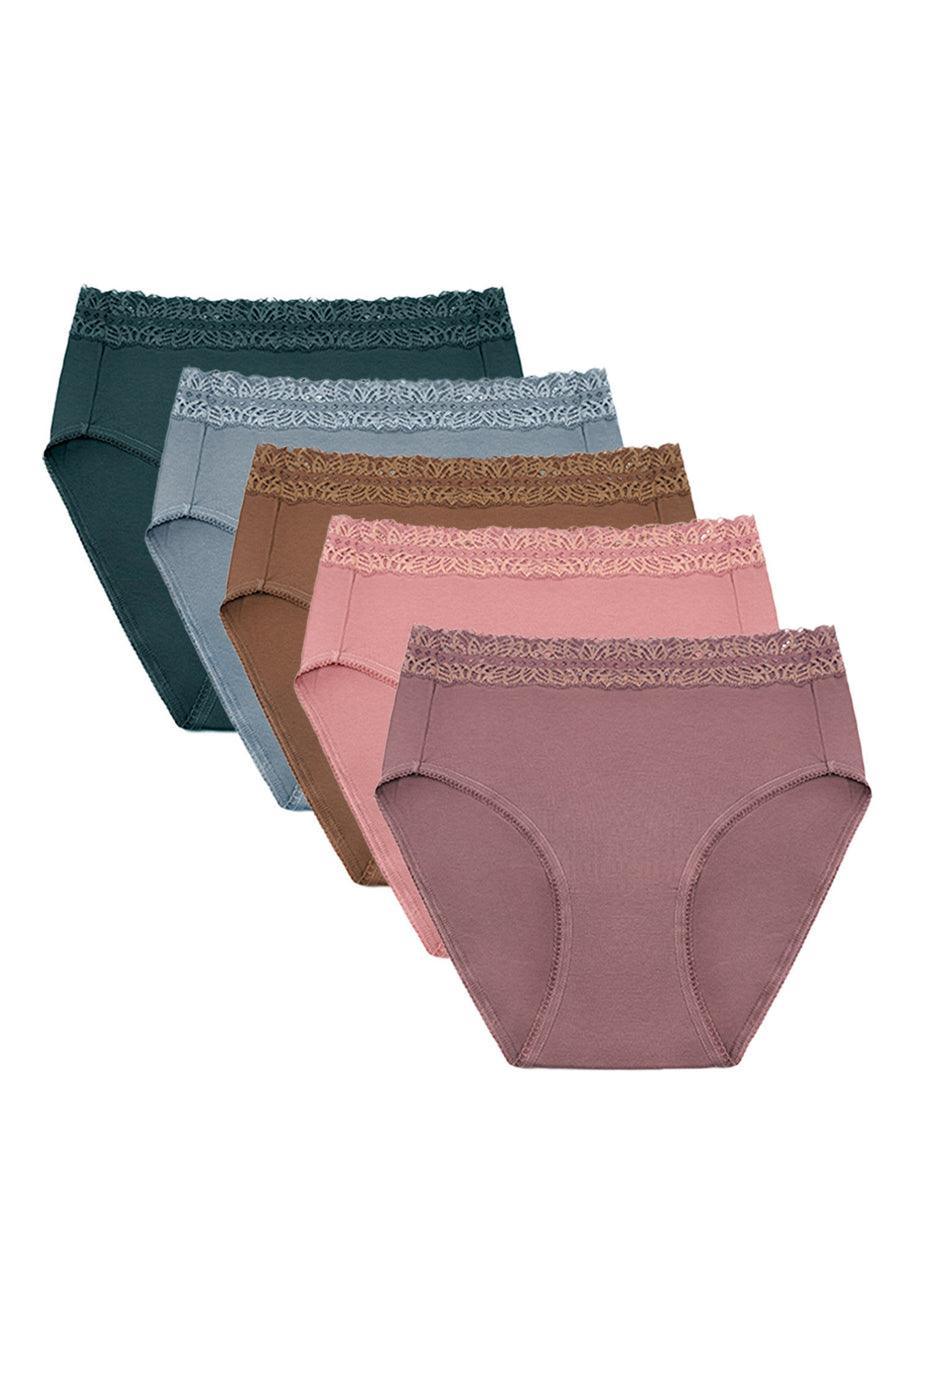 High-Waisted Postpartum Recovery Panties (5 Pack) - Milk & Baby 